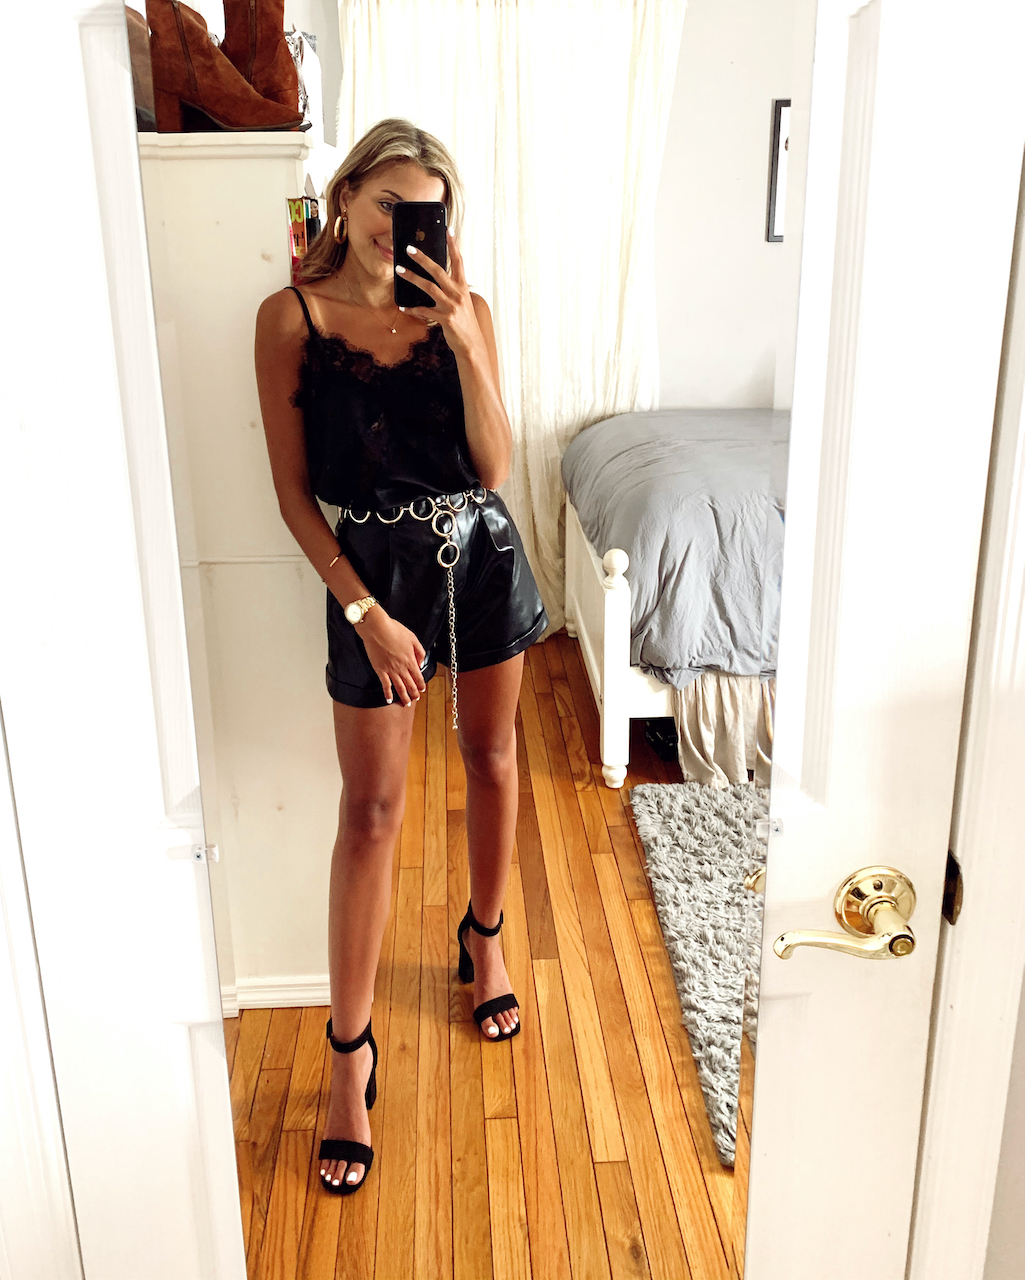 16 Date Night Outfit Ideas For The Summer